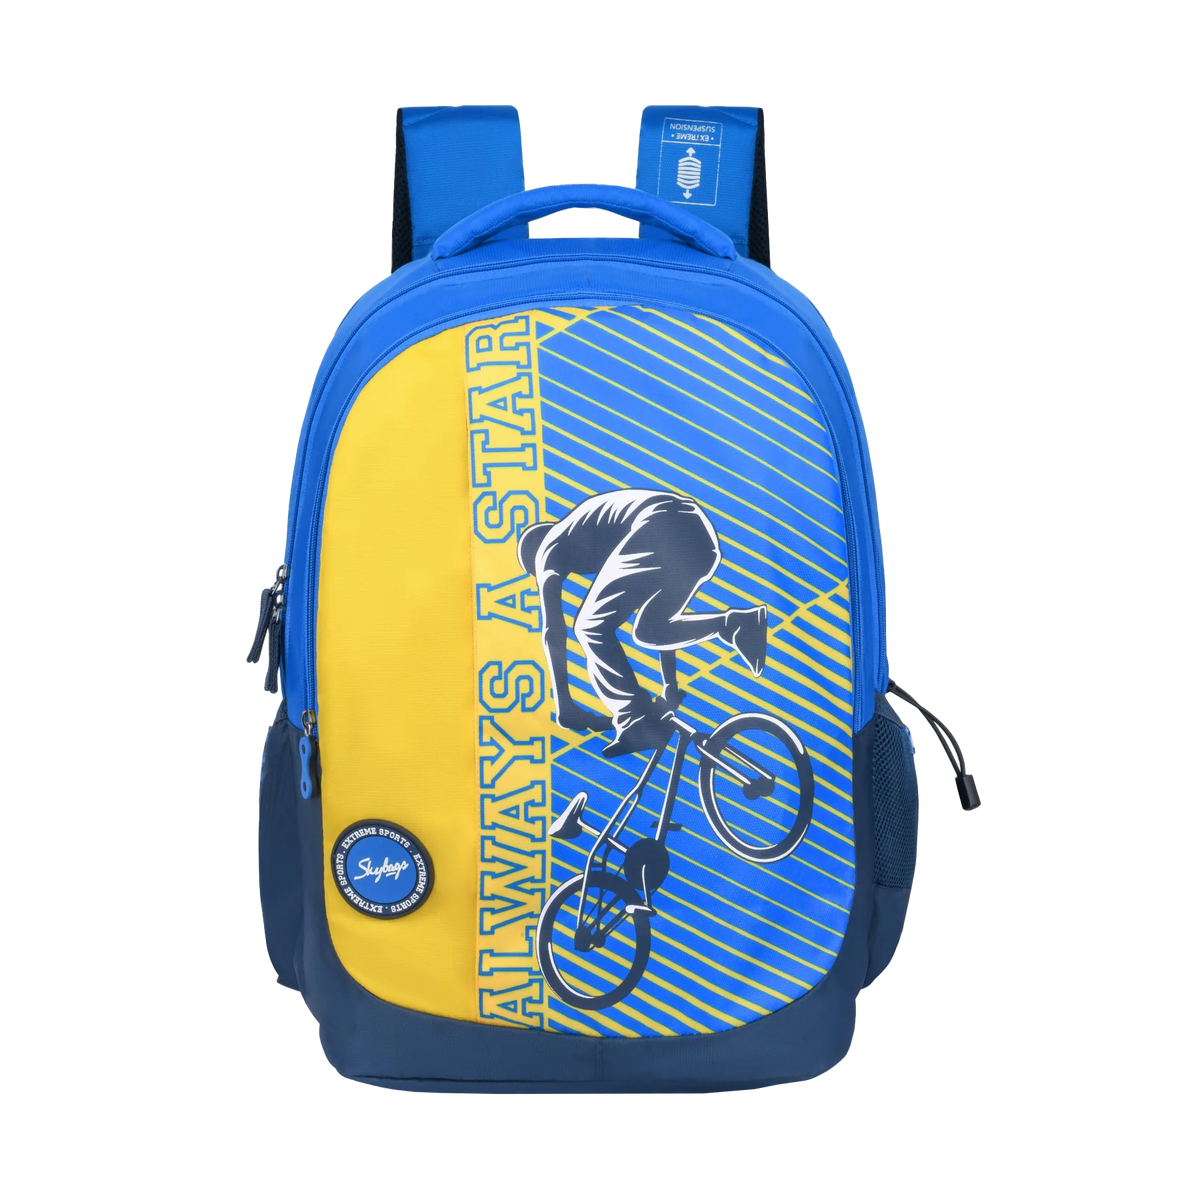 Skybags Squad Pro 01, 38 L Backpack Blue, SQUAD PRO 01BLU